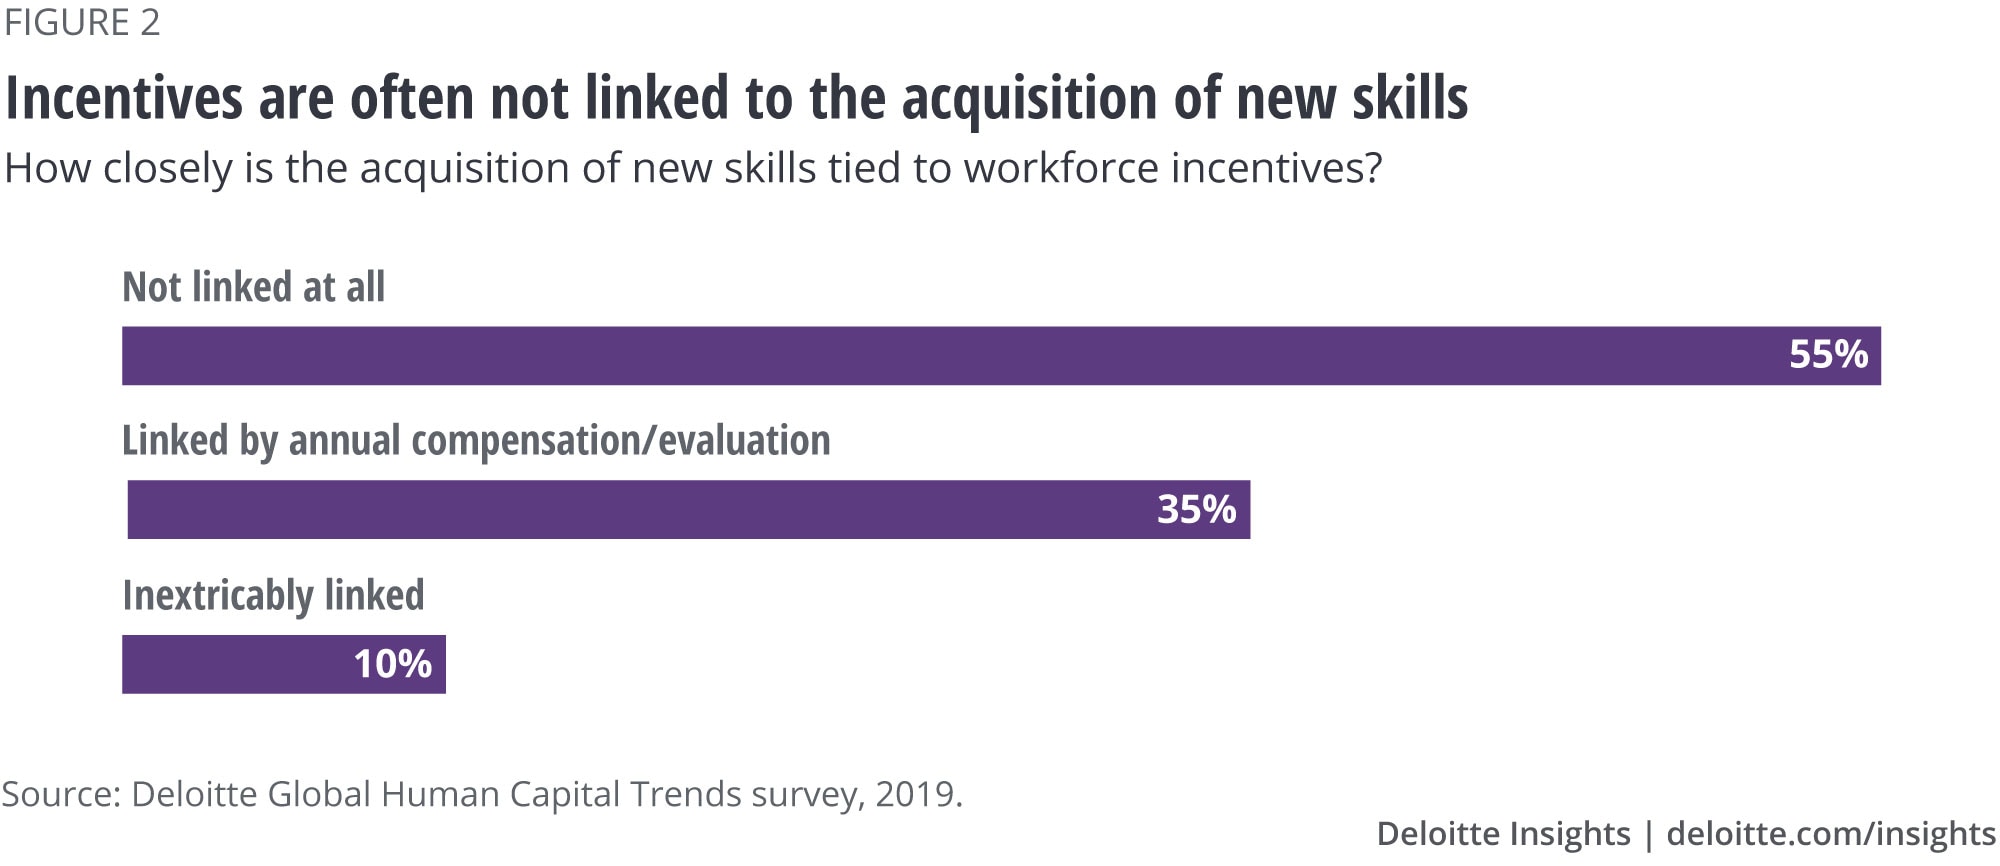 Incentives are often not linked to the acquisition of new skills